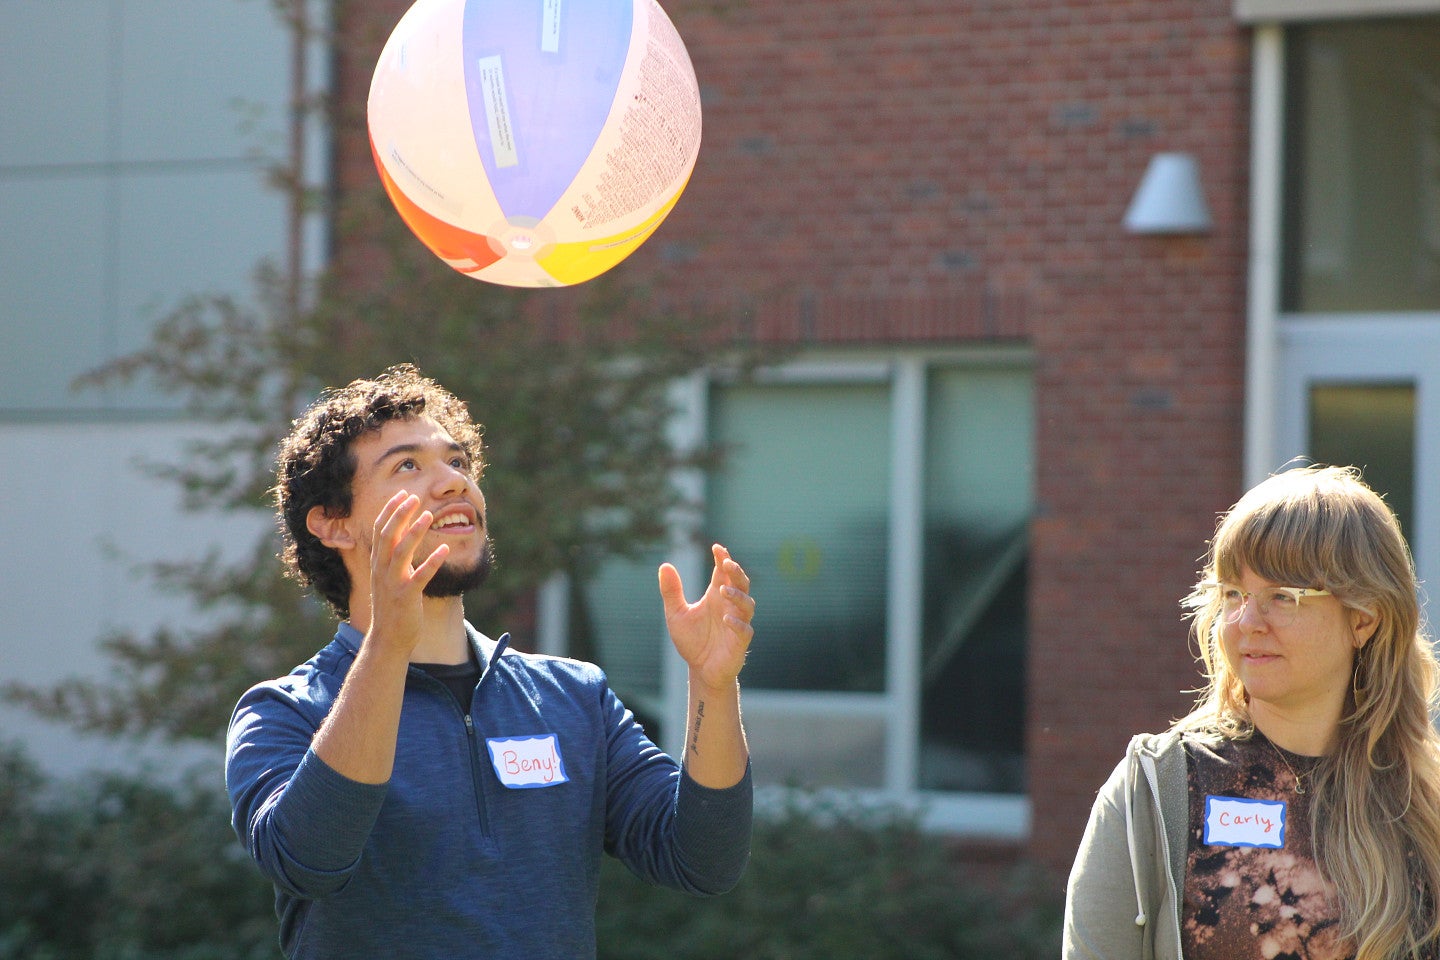 Photograph of RARE cohort member, Beny, participating in a team building exercise with a beach ball.